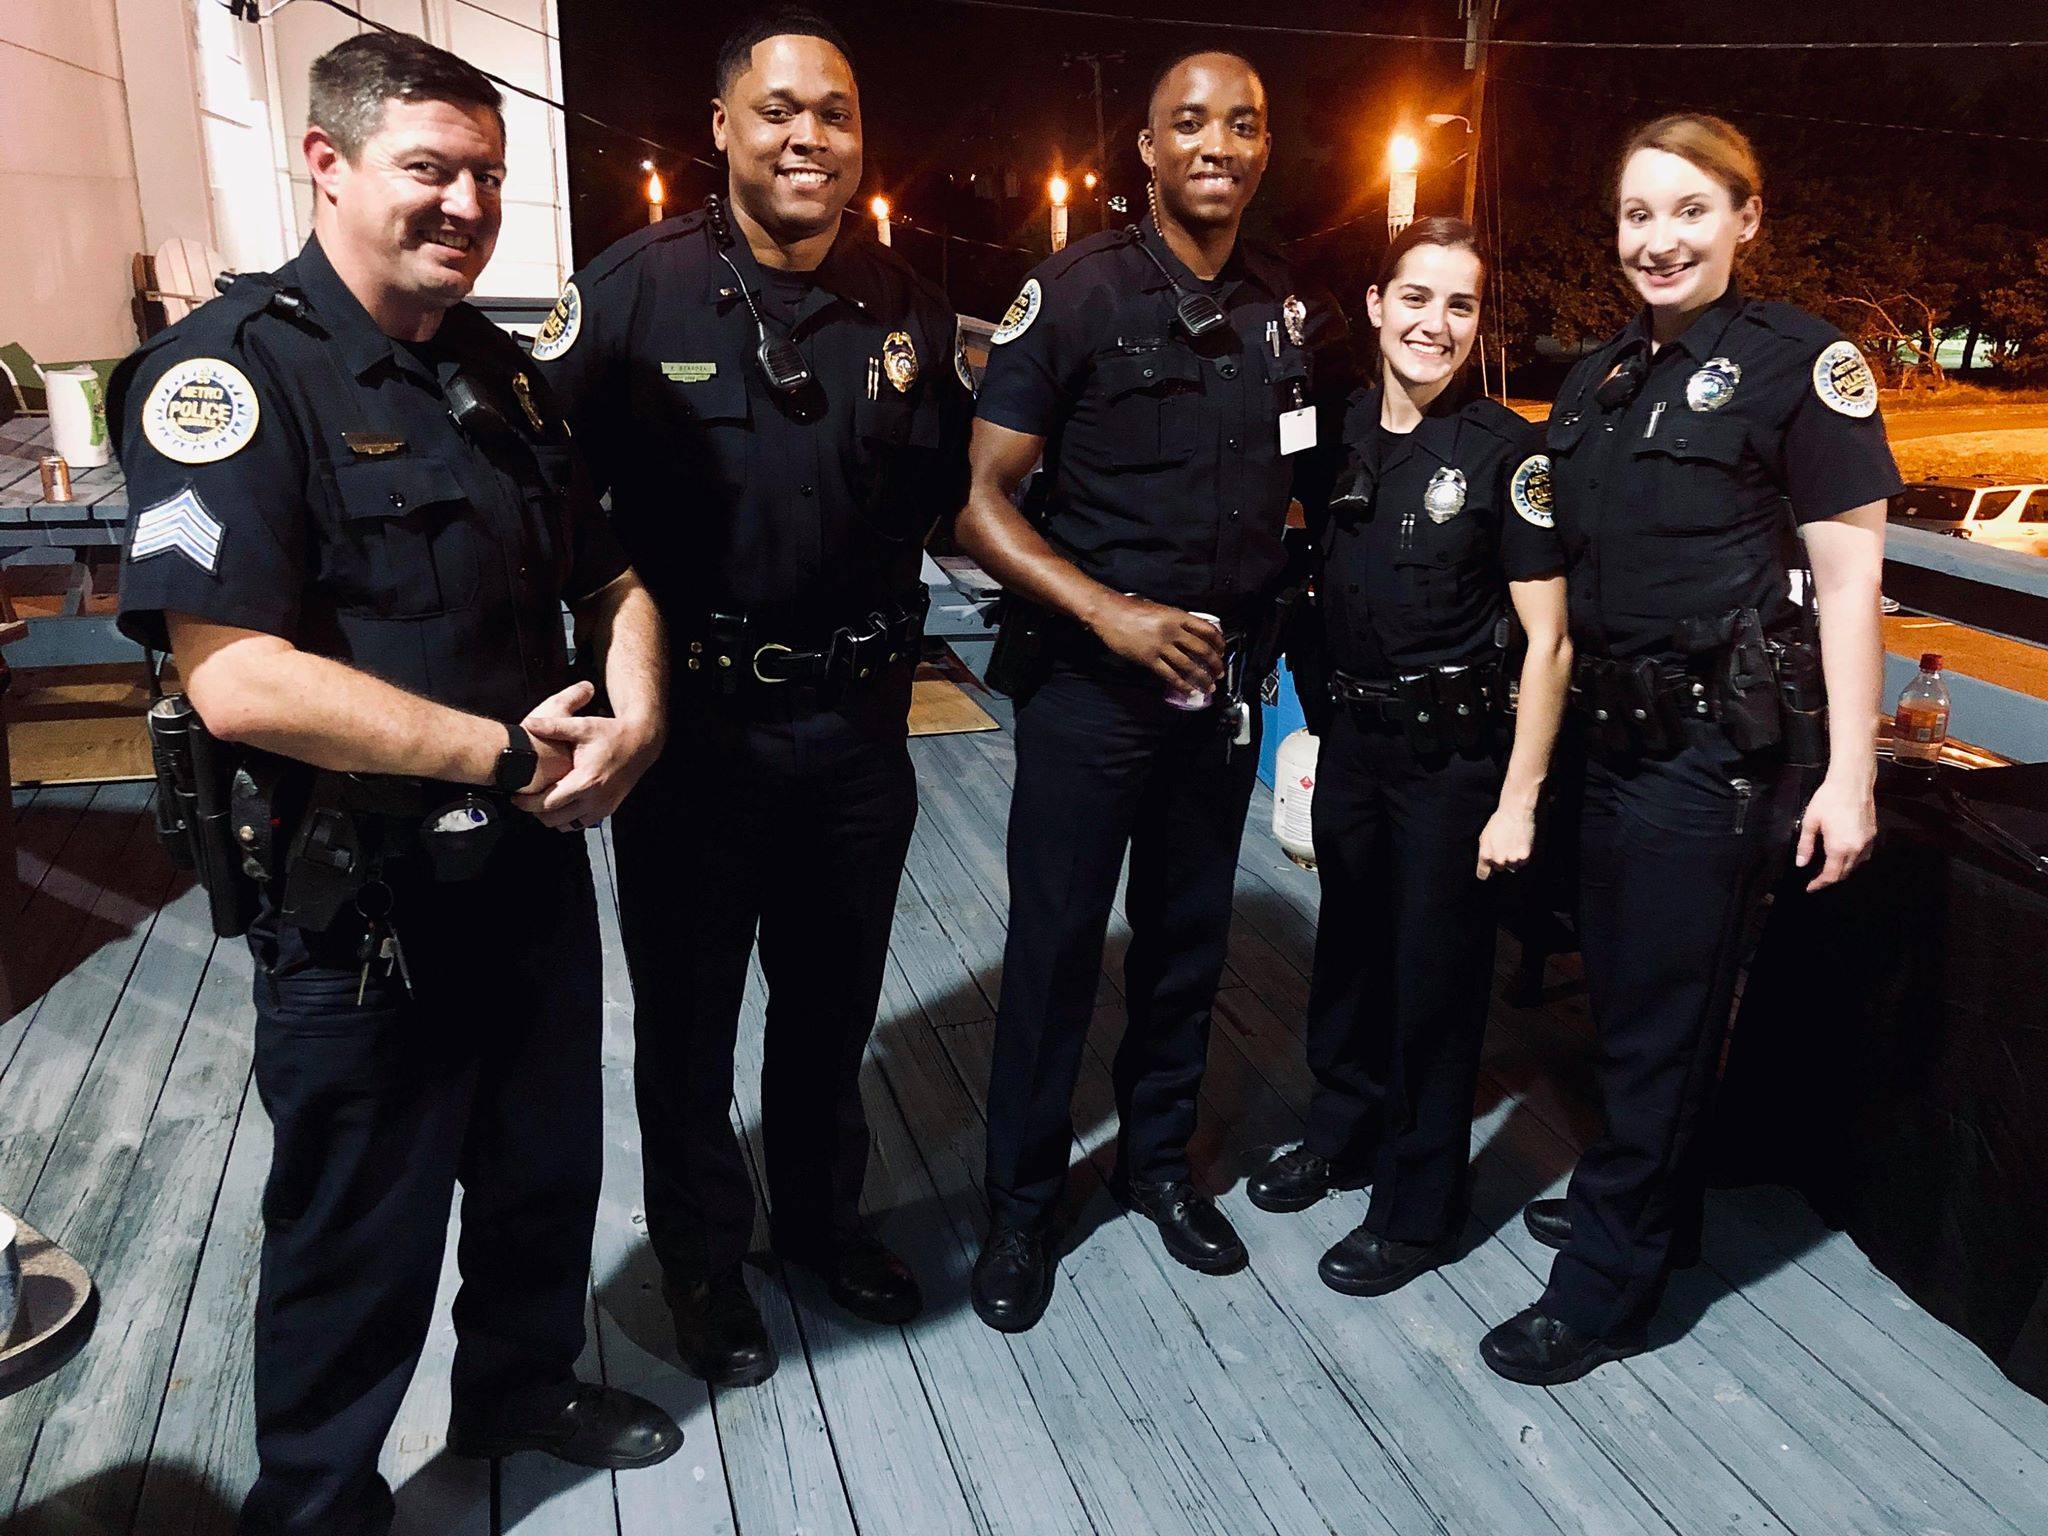 PHOTOS: Law enforcement officers across Middle Tennessee